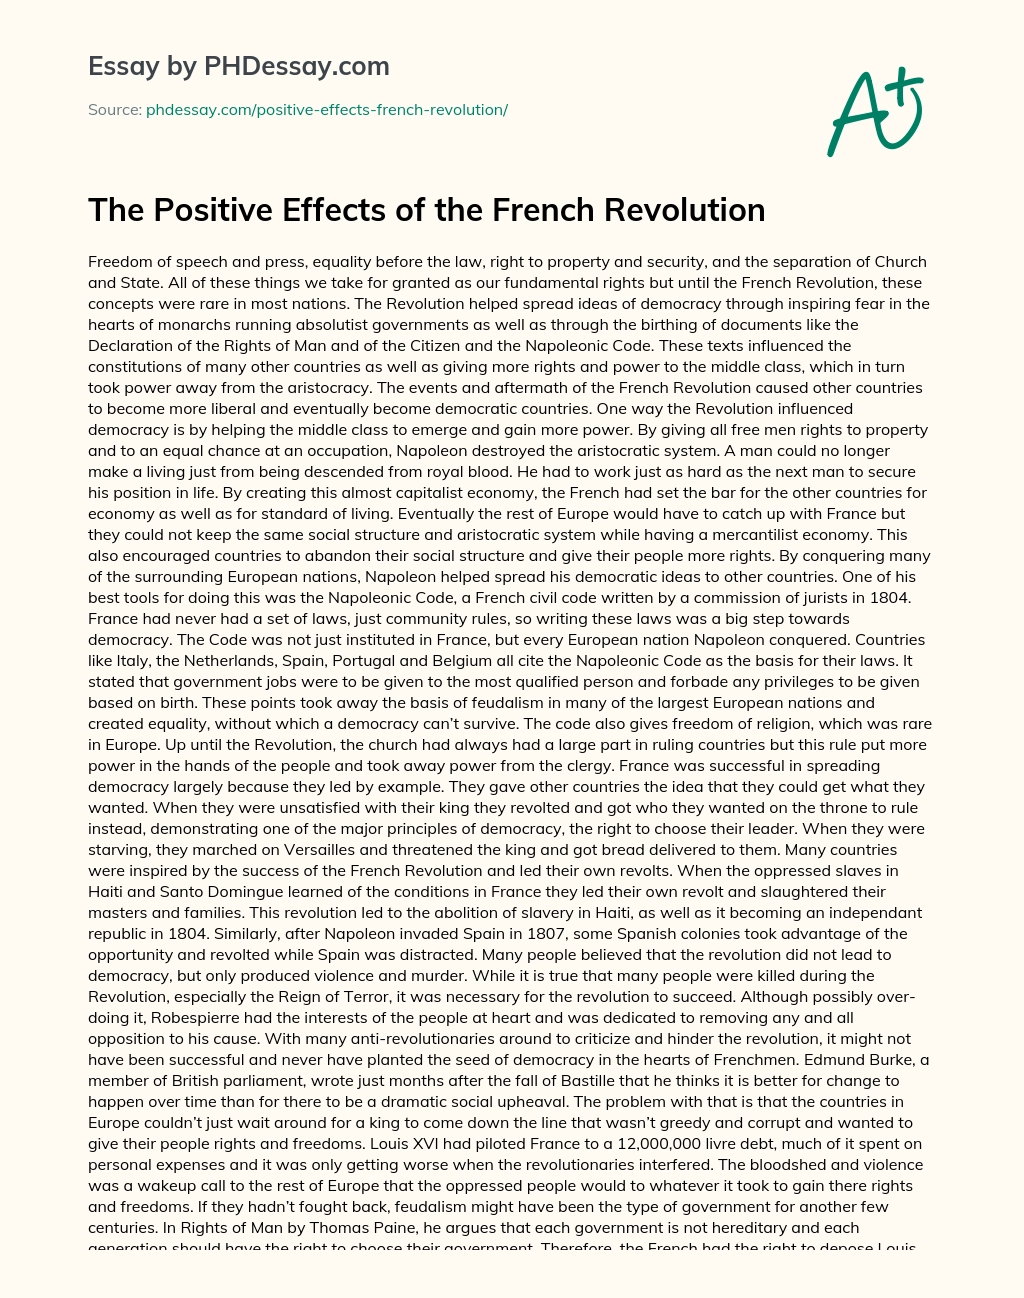 The Positive Effects of the French Revolution essay